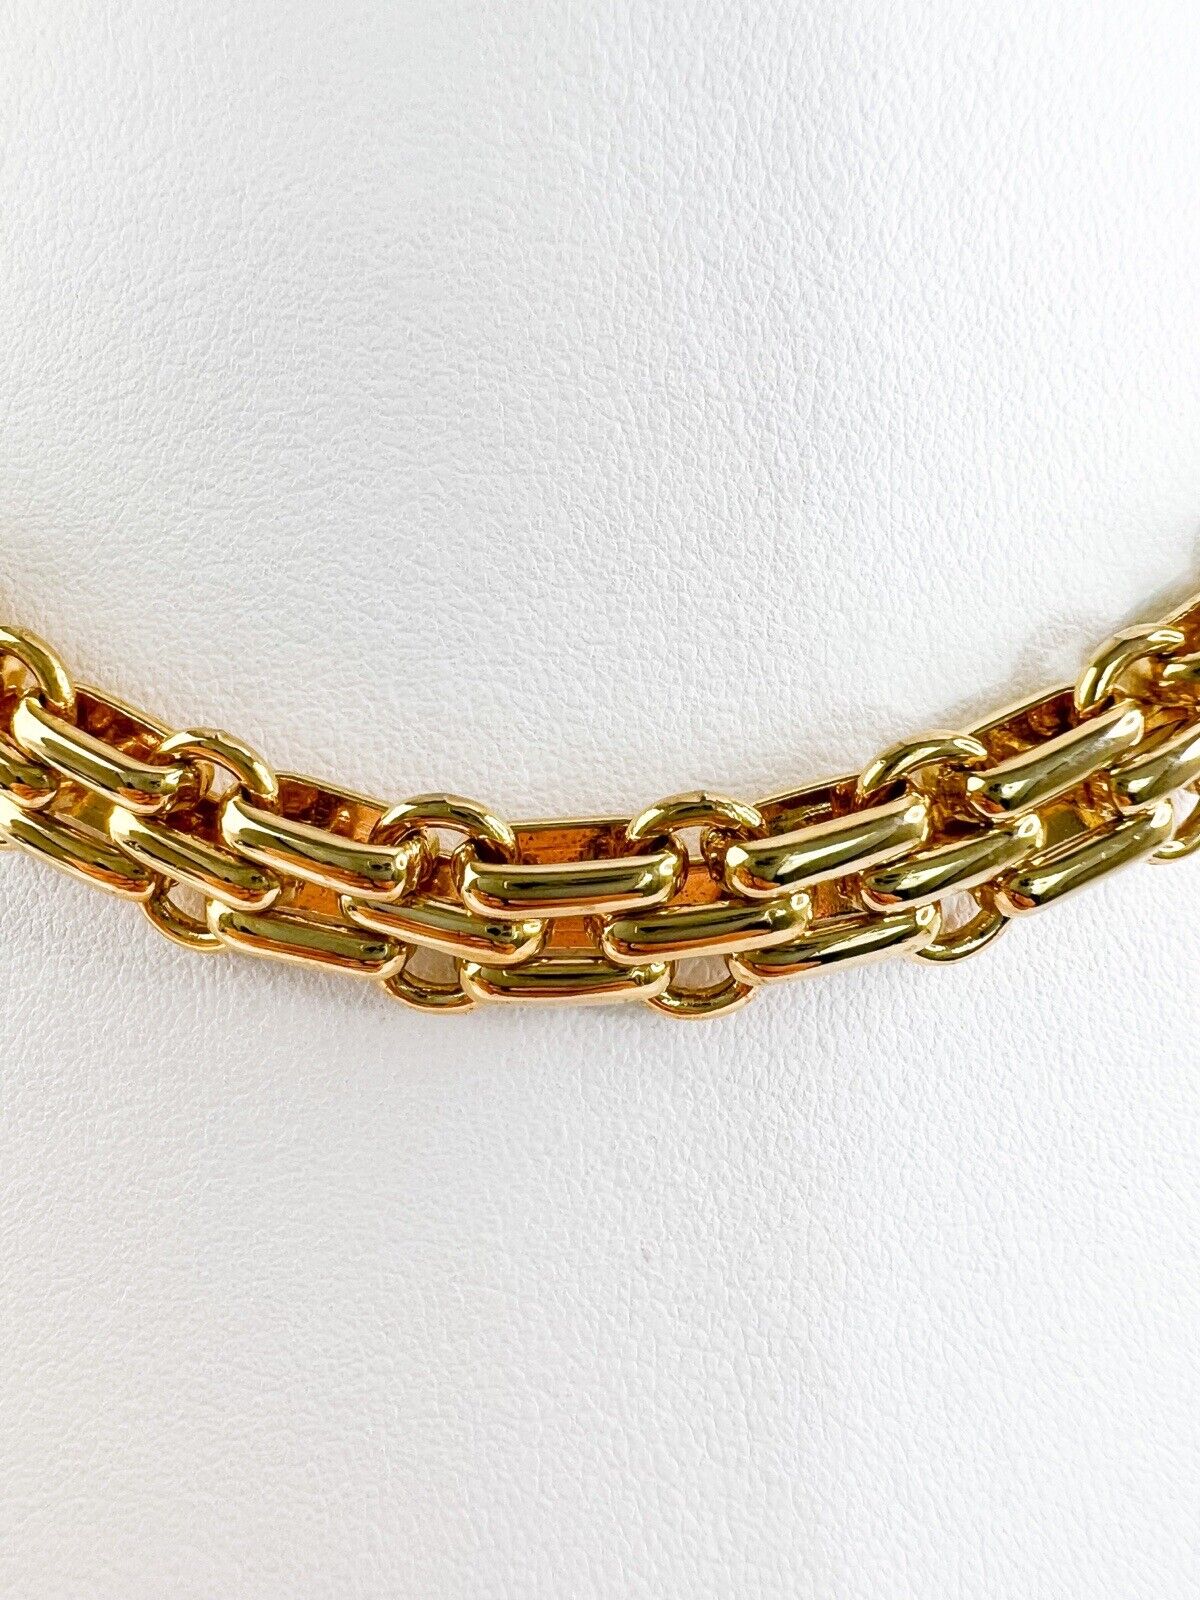 Vintage Givenchy Necklace, Vintage Necklace, Choker Necklace Gold, Gold Choker Necklace, Gift for her, Jewelry for women